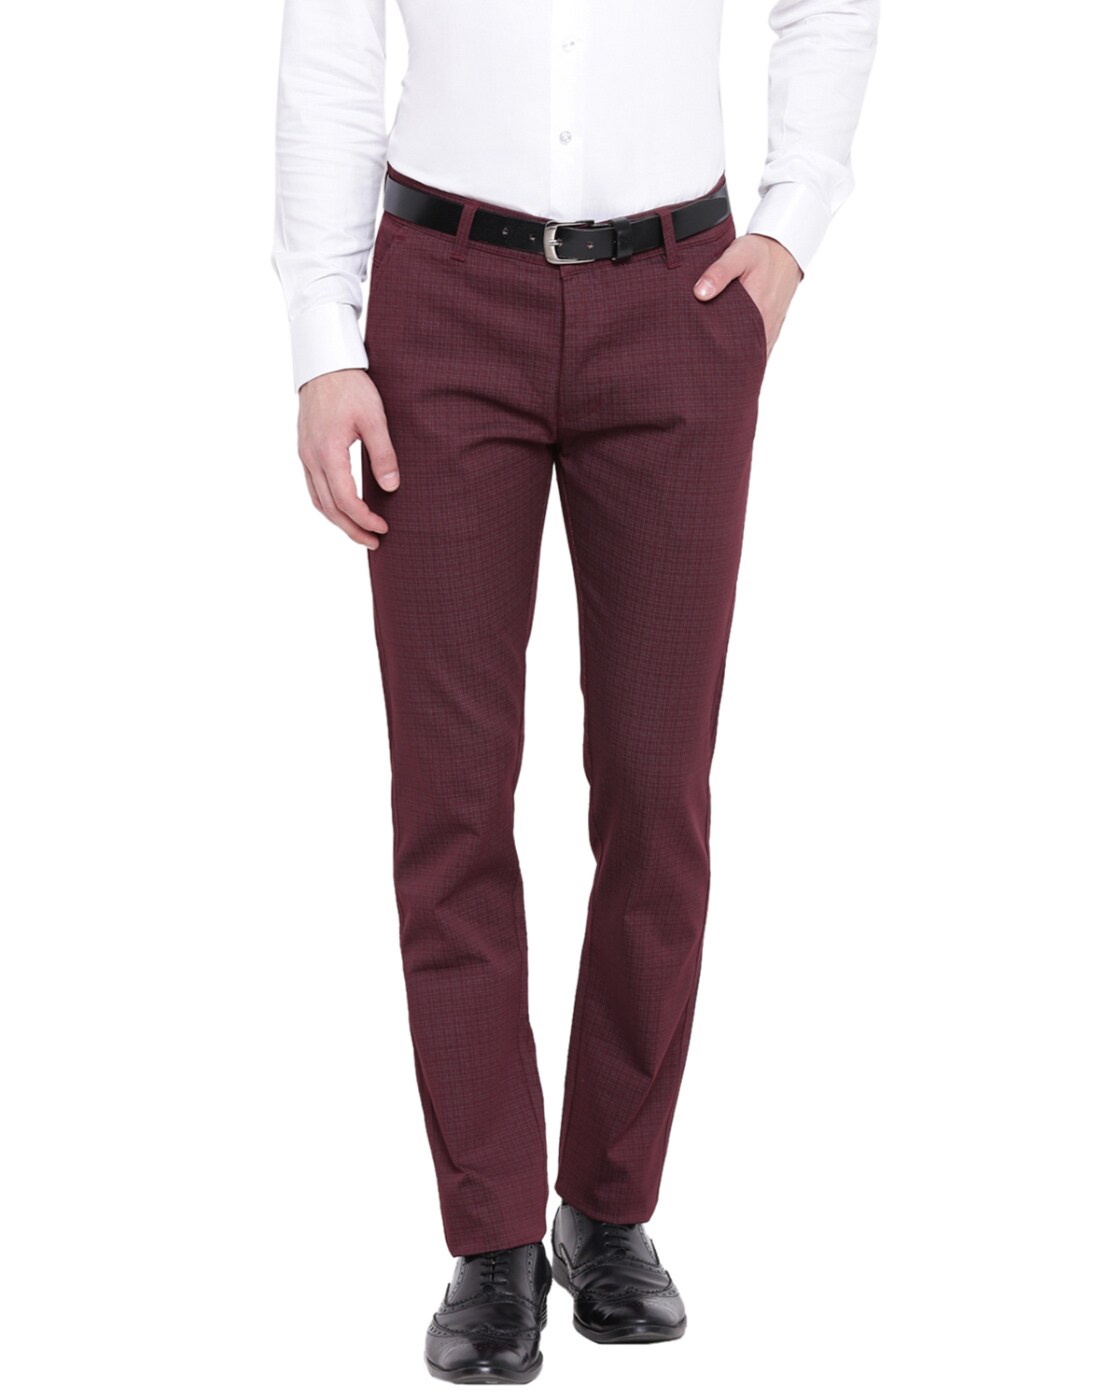 11 Maroon Pants Outfits Ideas For Men To Have Stylish Look